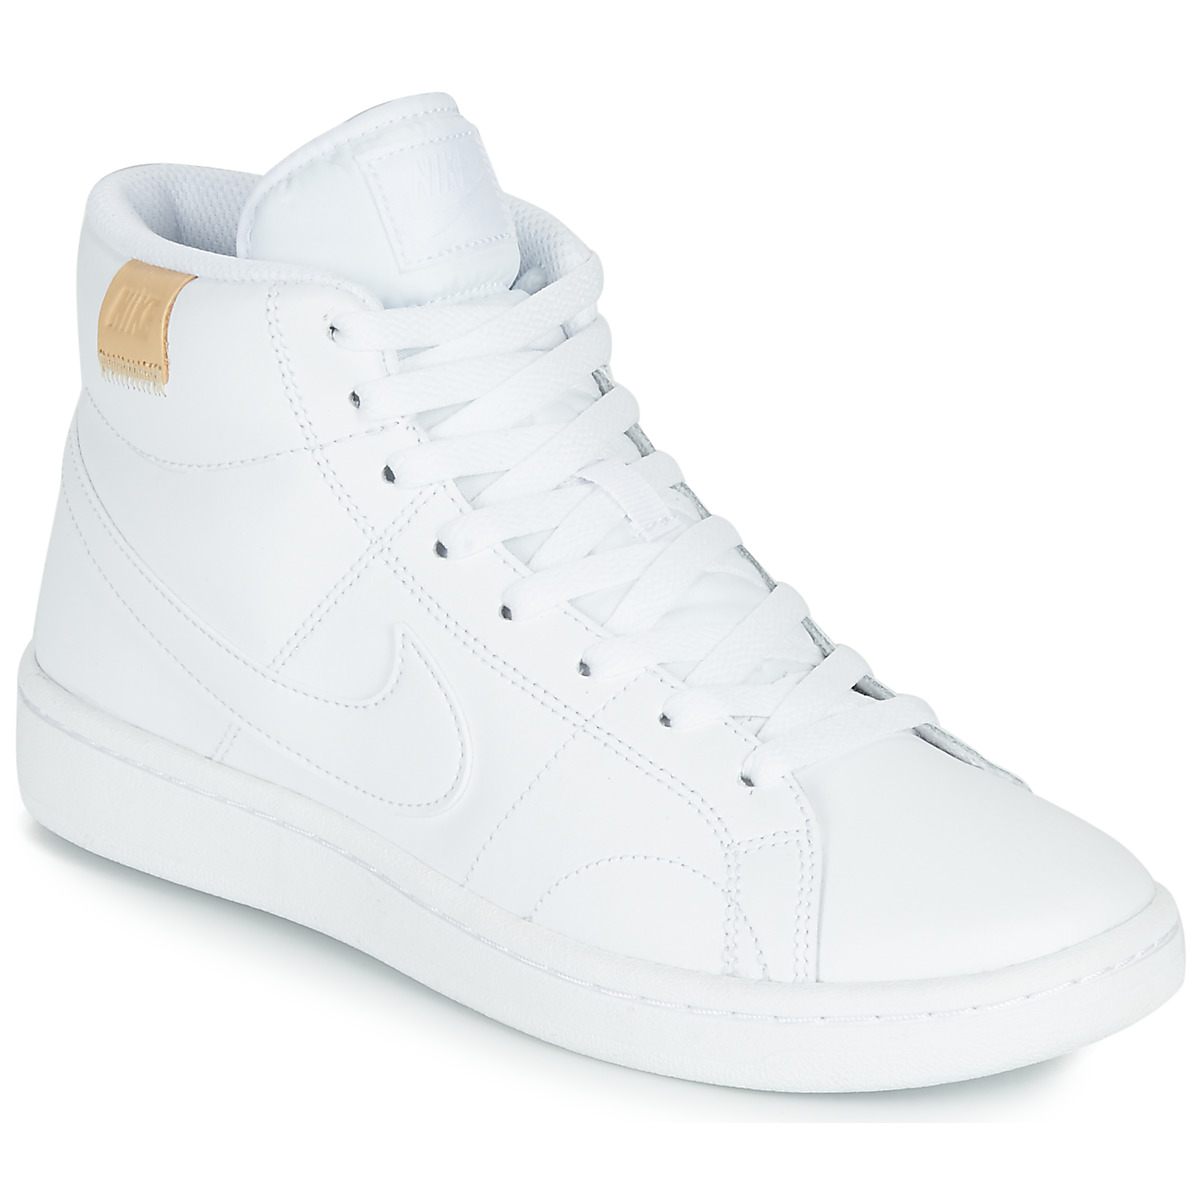 Nike COURT ROYALE 2 MID Baskets Montantes Blanches 